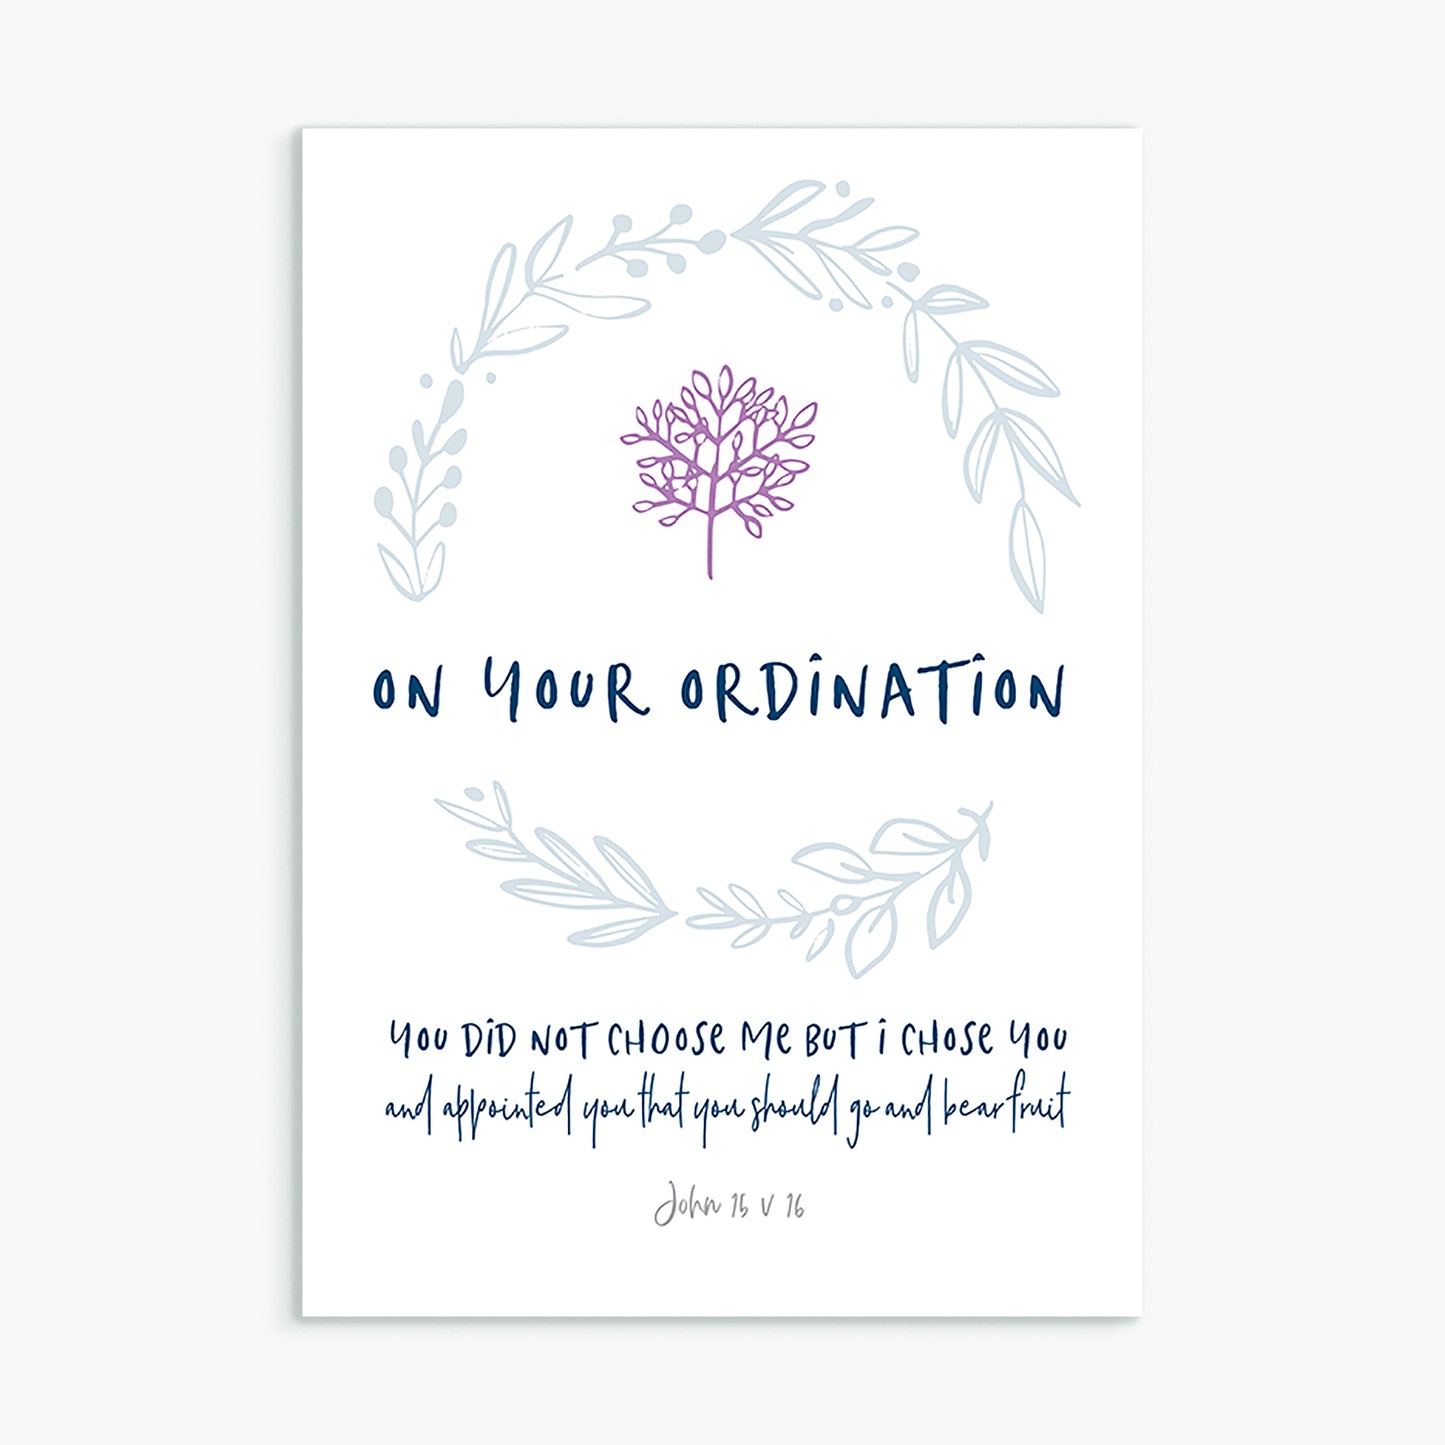 On Your Ordination greeting card